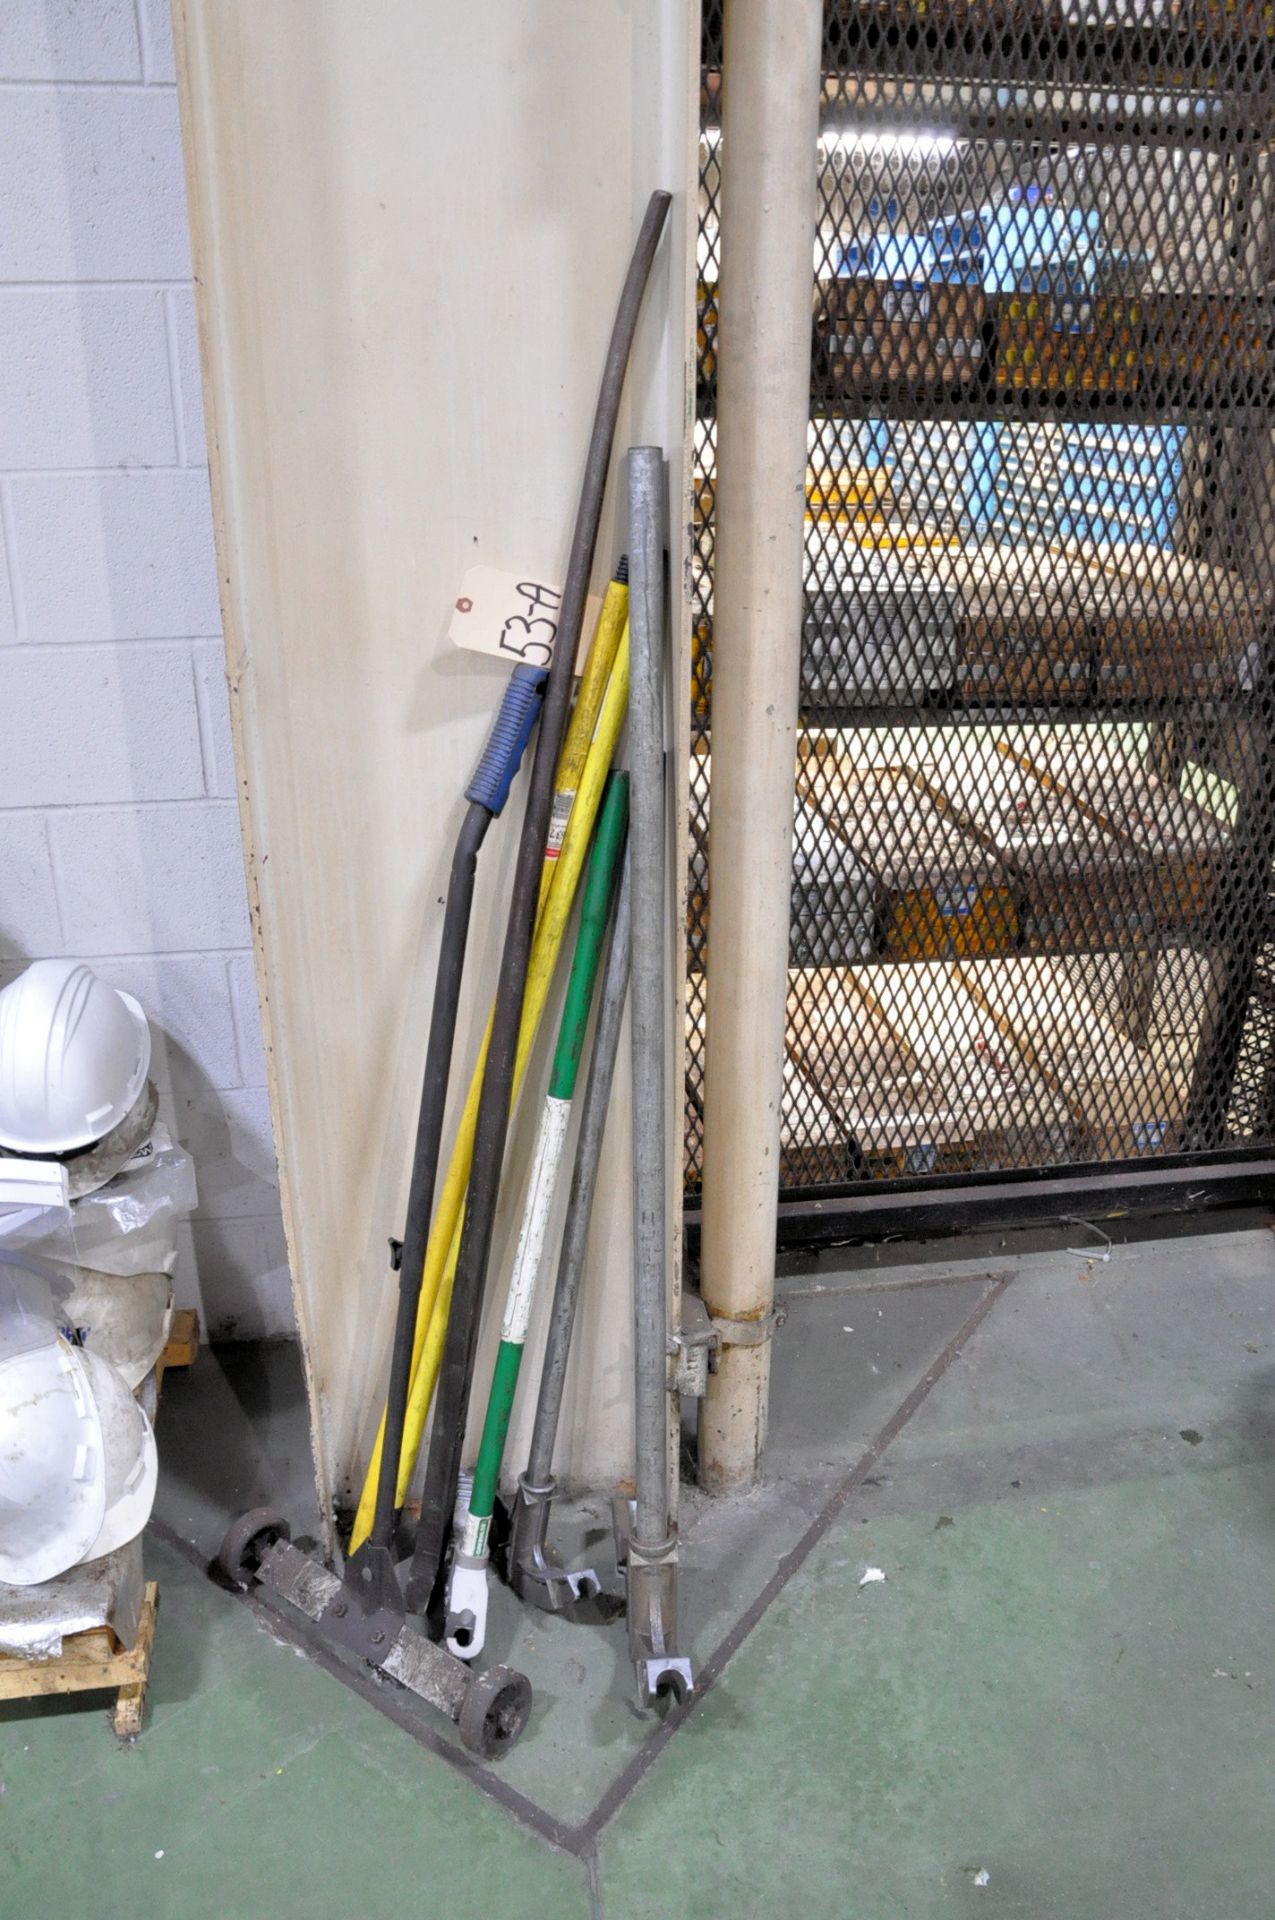 Lot-Conduit Bender Tools, Pry Bar and Small Rolling Floor Magnet, (E-3)